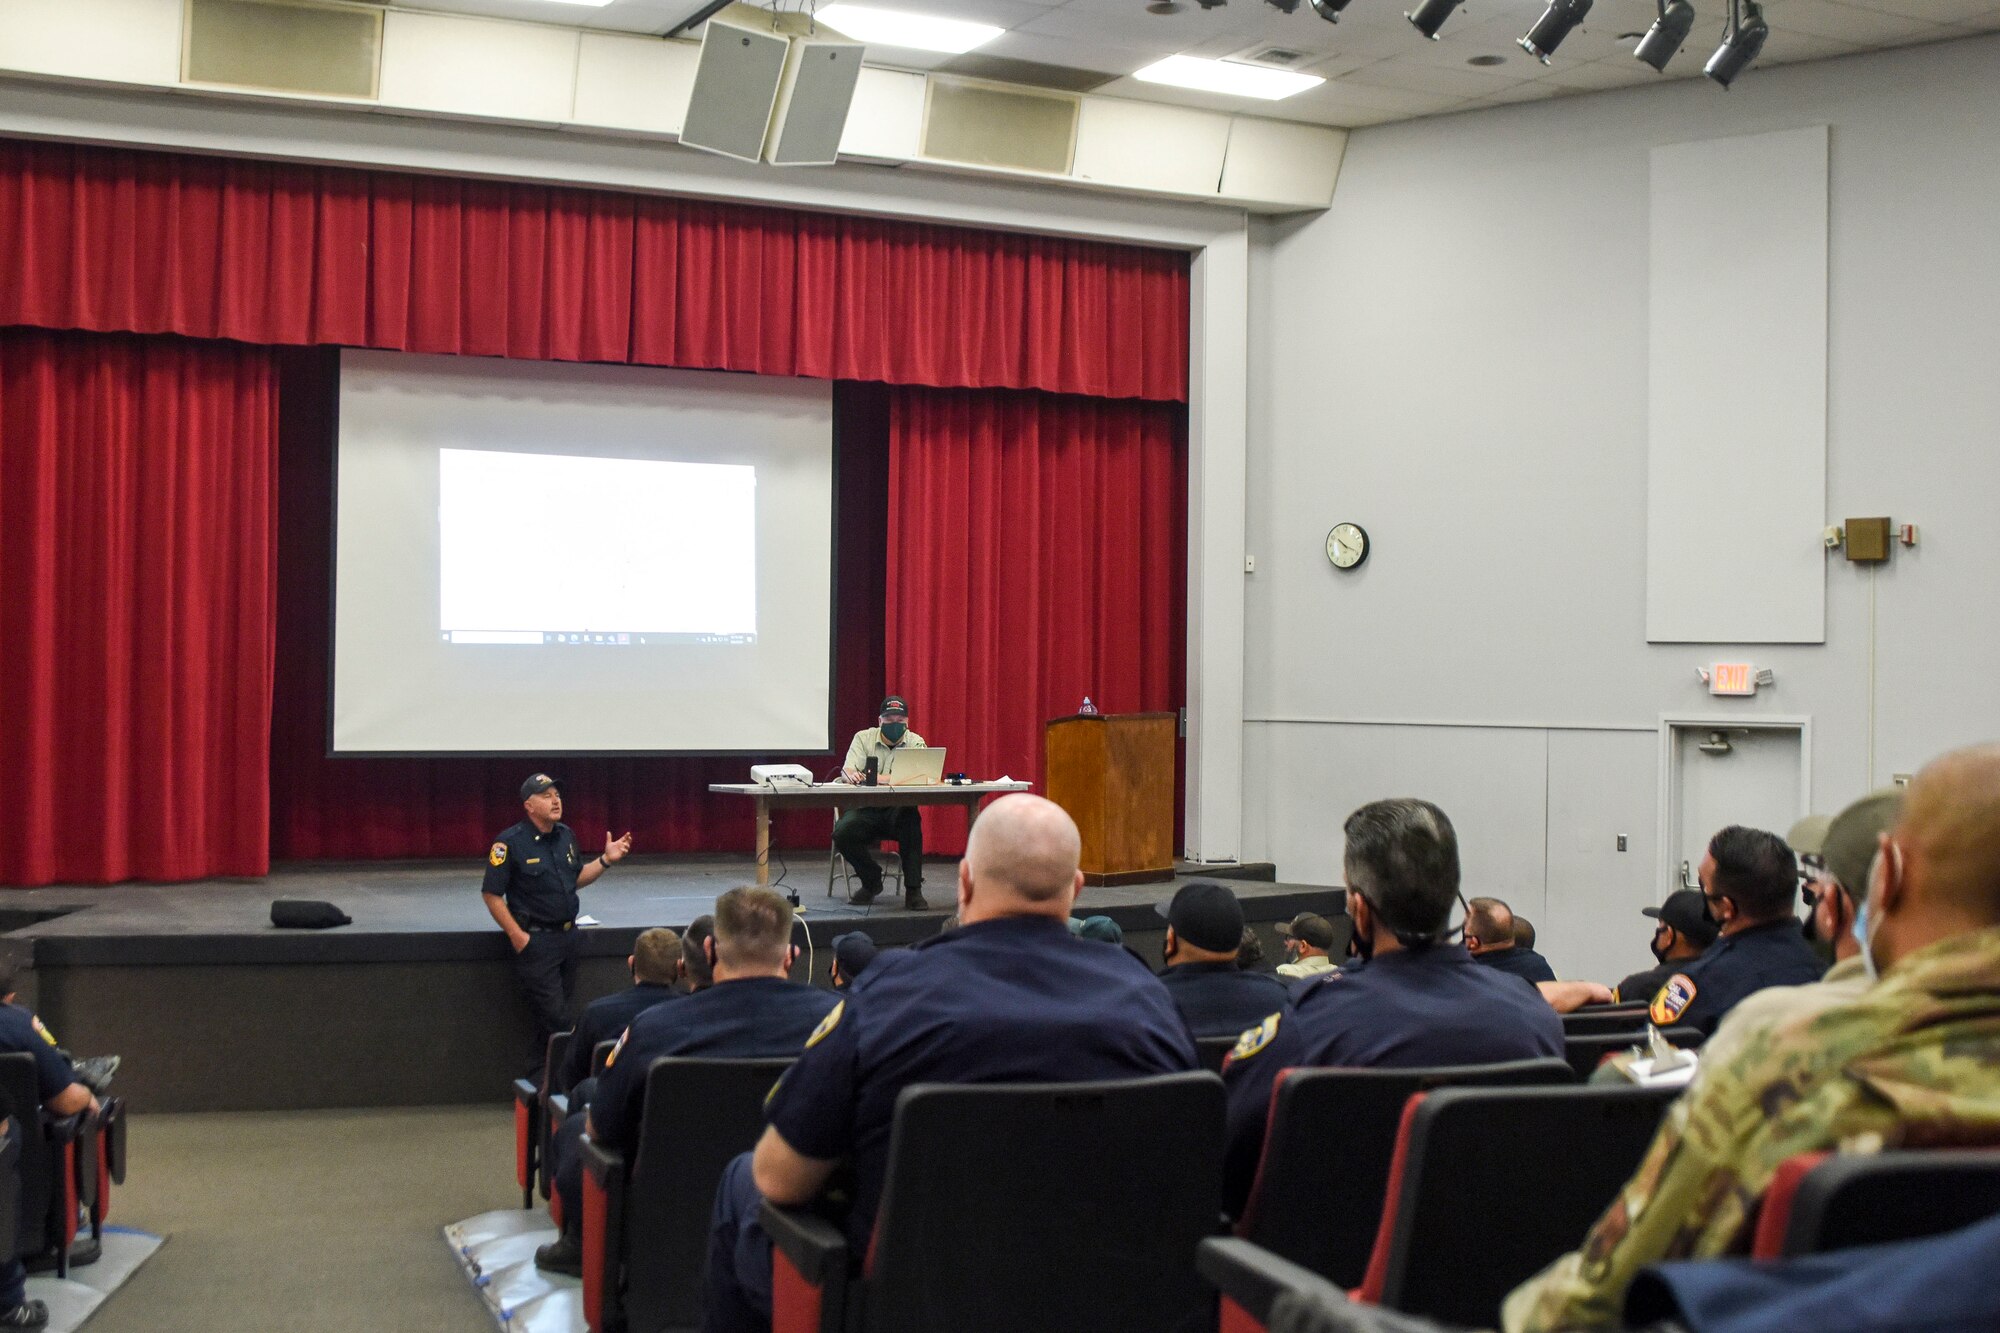 Members from Cal Fire, the National Forestry Service, the California National Guard, the Fresno Country Sheriff's Department, and other response organizations meet, Sept. 6, 2020, at Sierra High School in Tollhouse, Calif. which was used as the Creek Fire Emergency Operations Center and Incident Command Post.